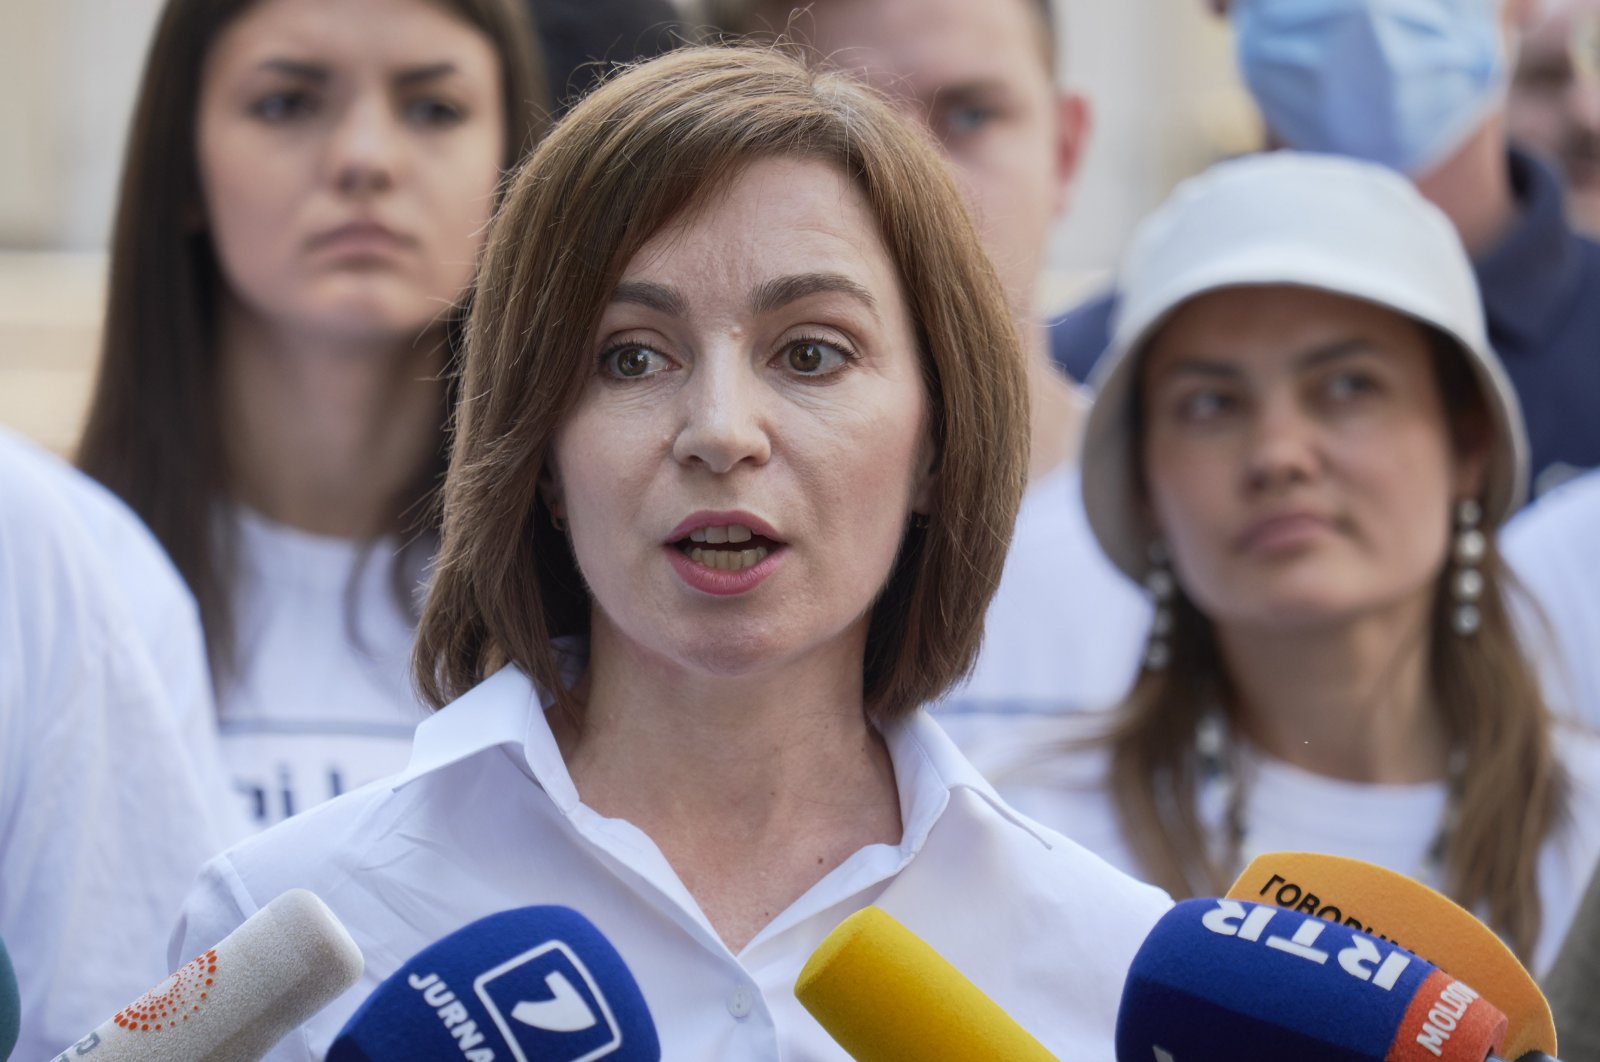 President of Moldova Maia Sandu gives a statement to the media outside a voting station during the early parliamentary elections, Chisinau, Moldova, July 11, 2021. (Getty Images Photo)